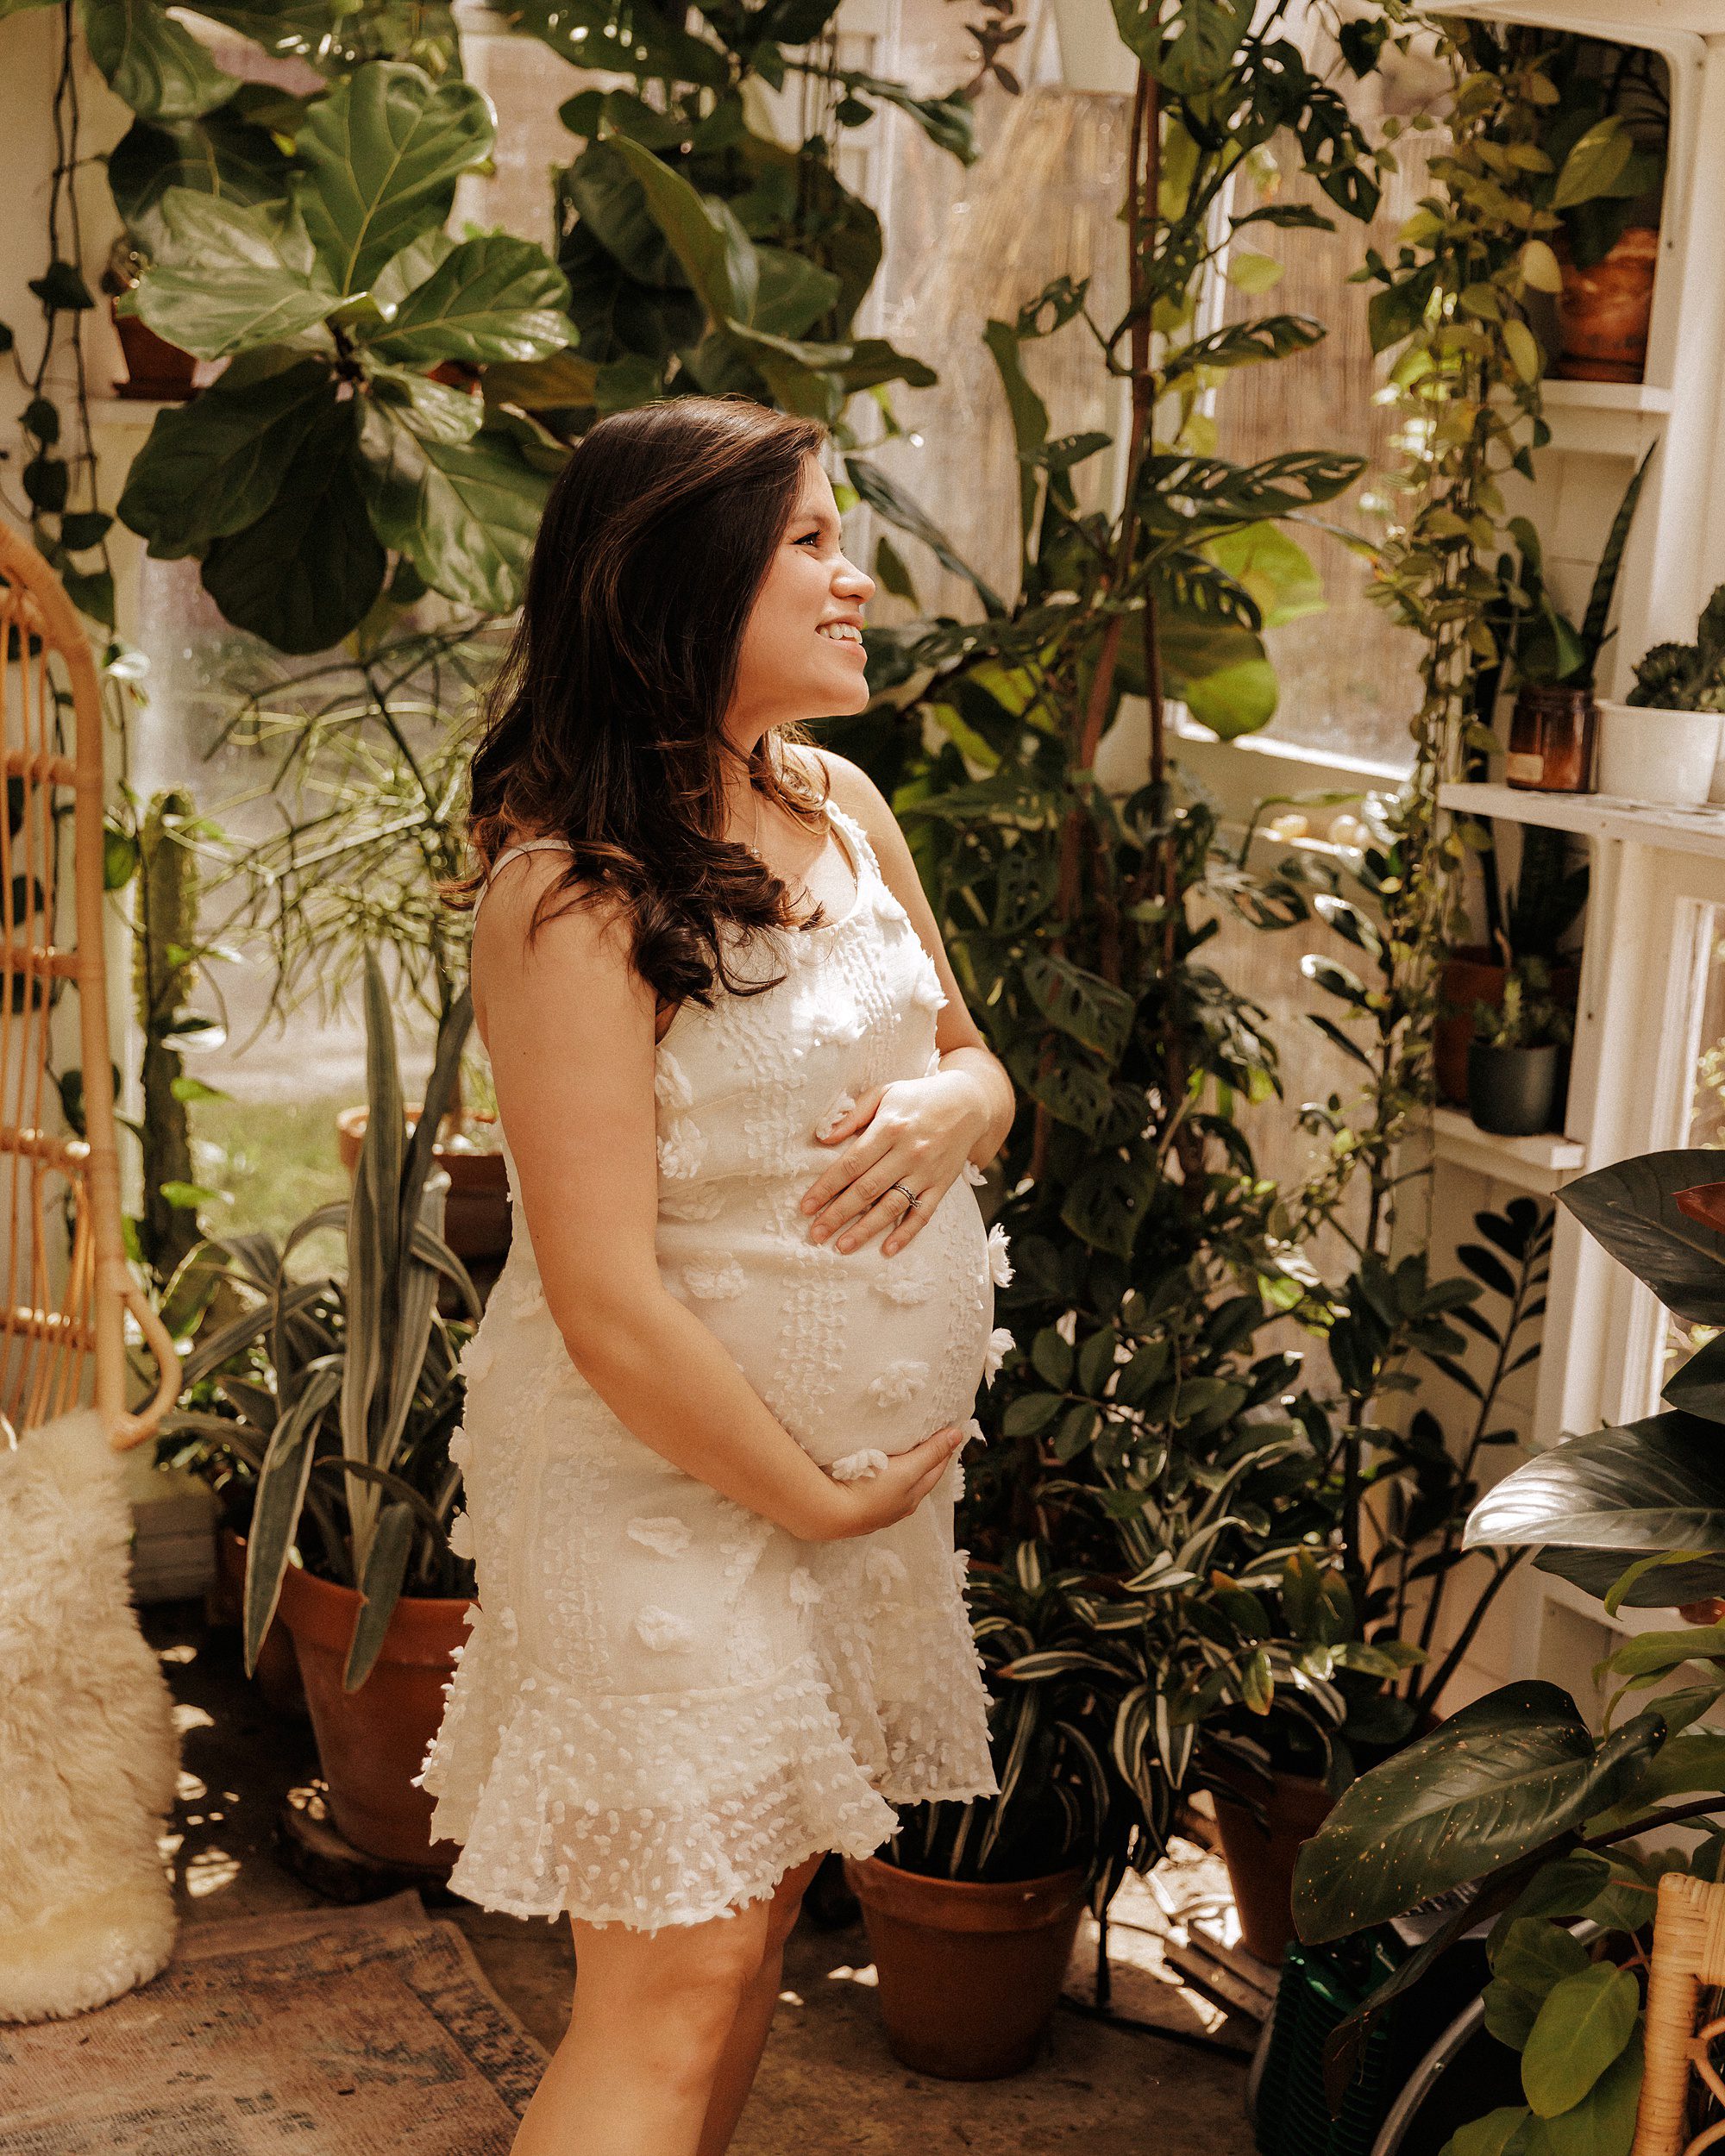 East Nashville Maternity Photography, Nashville Maternity Photographer Ashley Erin West photograph from a Greenhouse Mini Session in the East Nash Greenhouse. Maternity Mini Session , Nashville Maternity Photographer Ashley Erin West photograph from a Greenhouse Mini Session in the East Nash Greenhouse. Maternity Mini Session